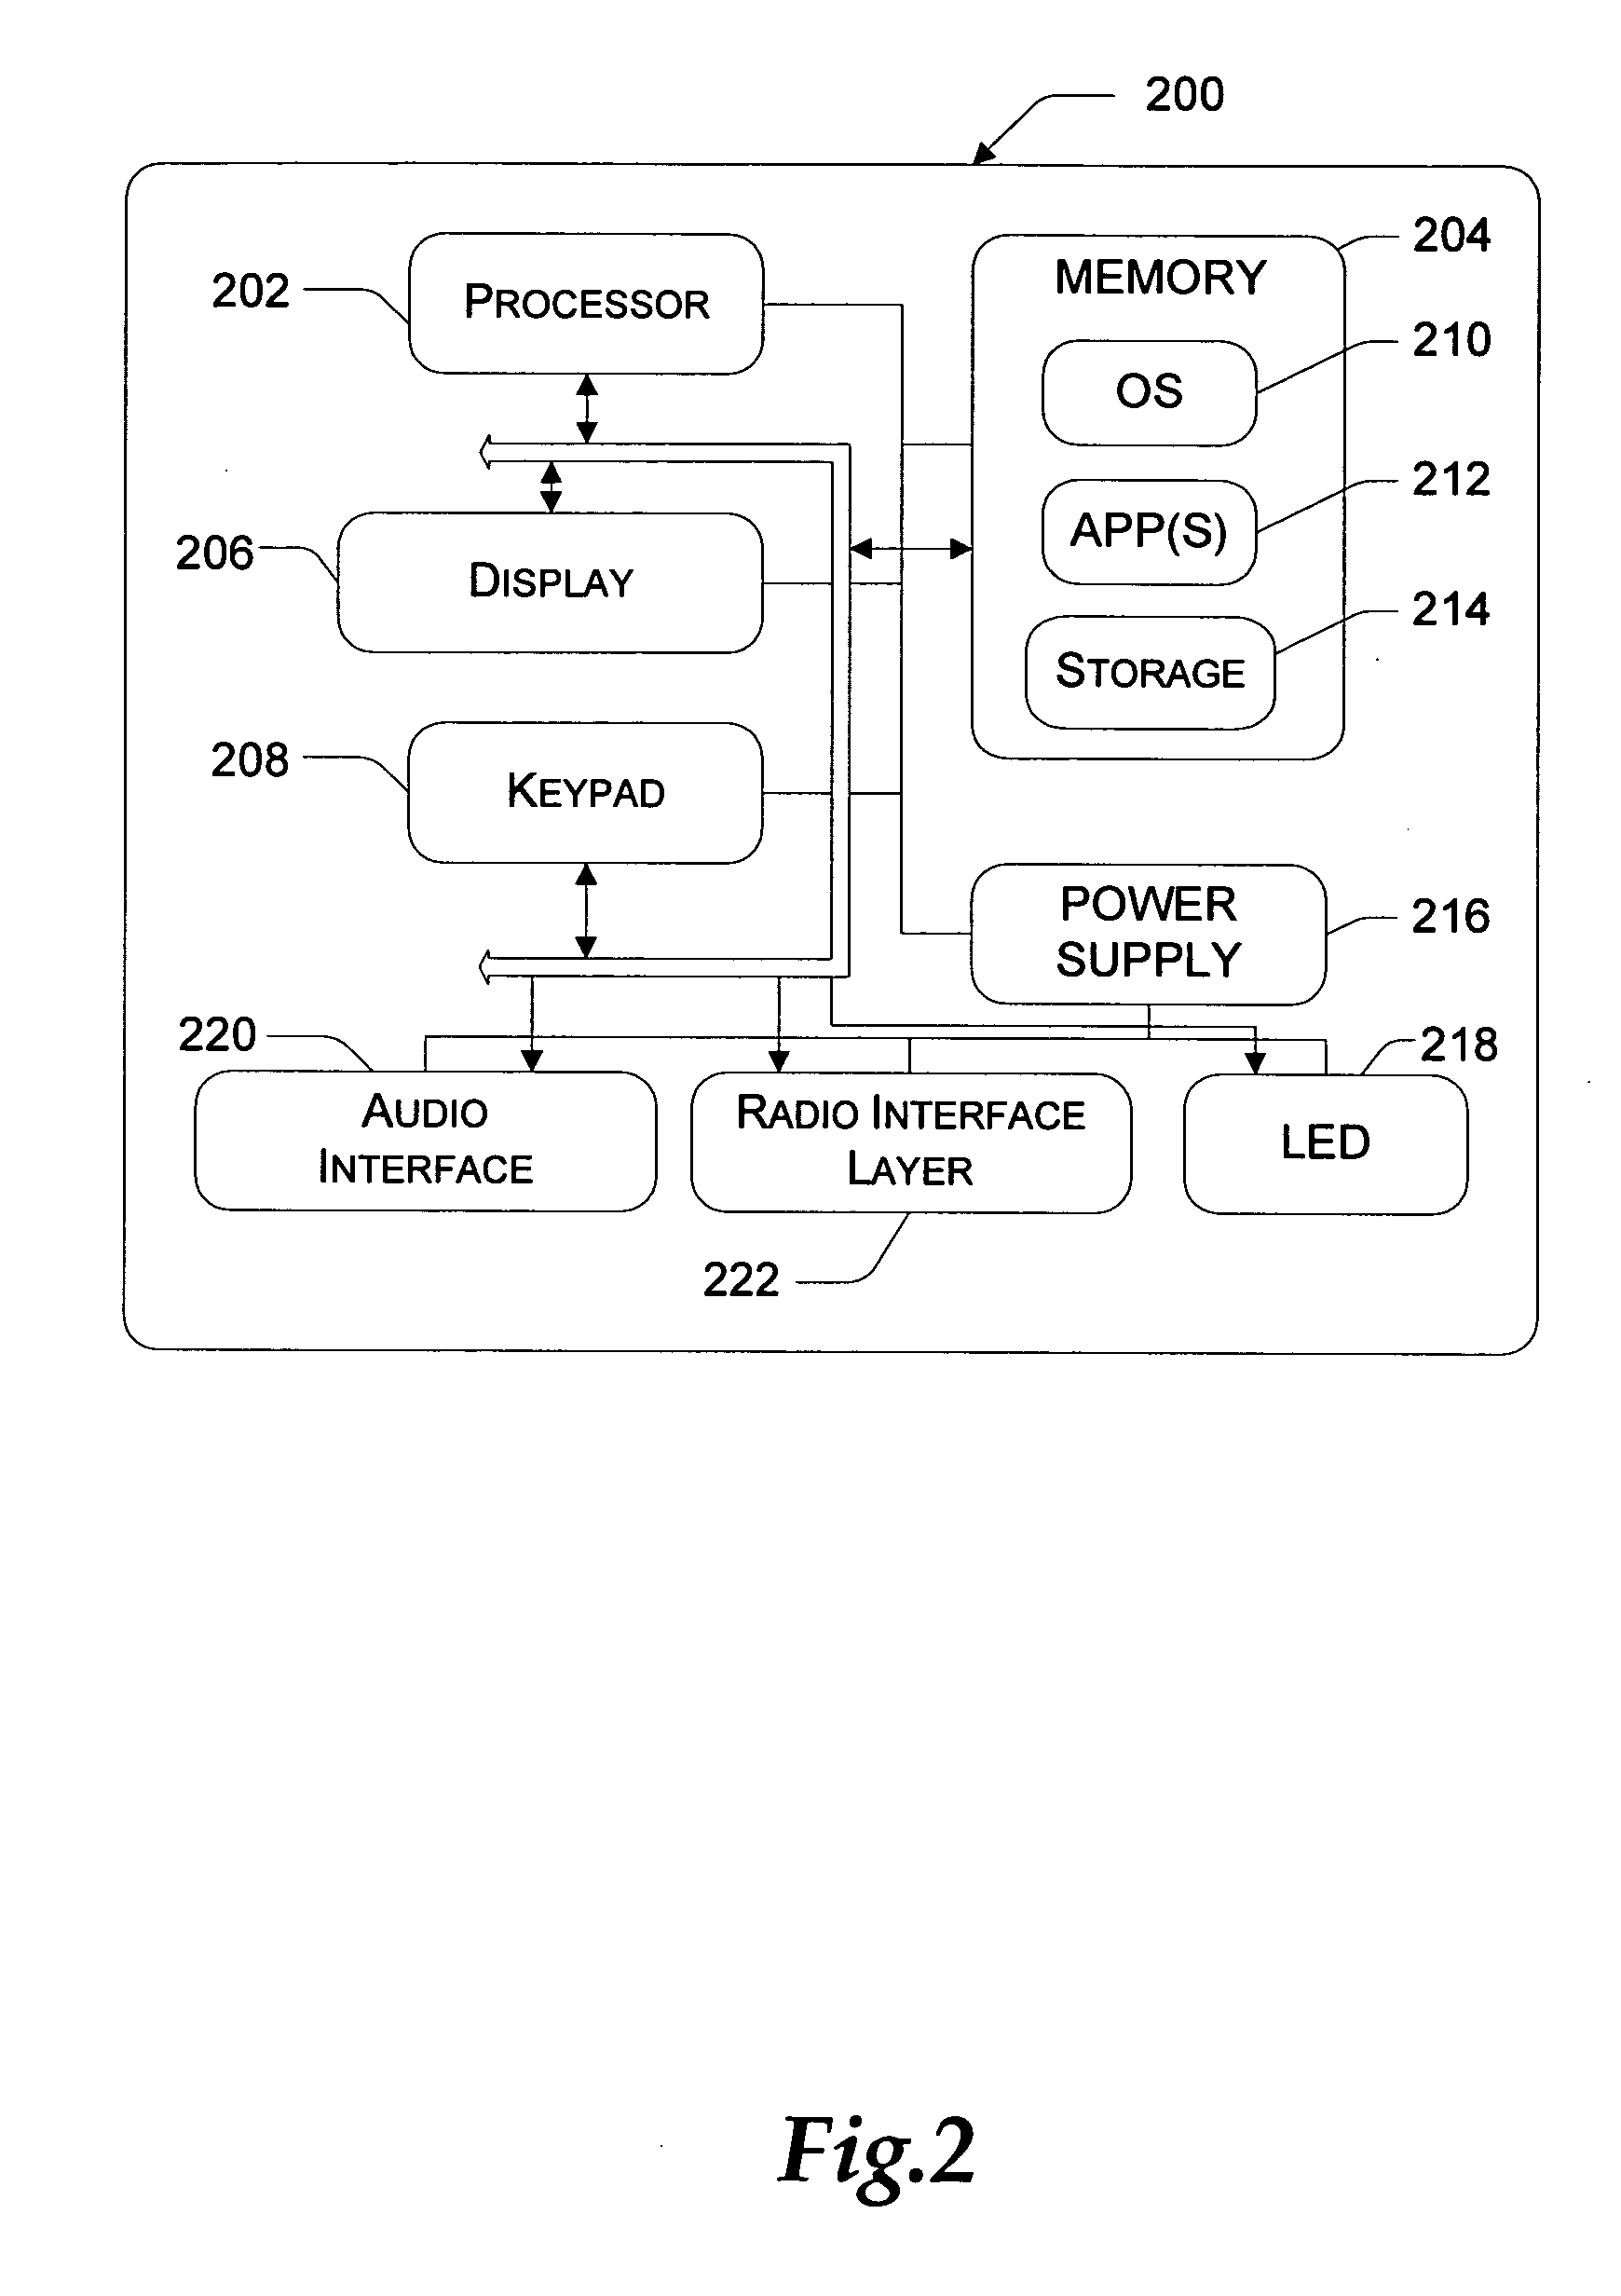 Method and system for using a color scheme to communicate information related to the integration of hardware and software in a computing device